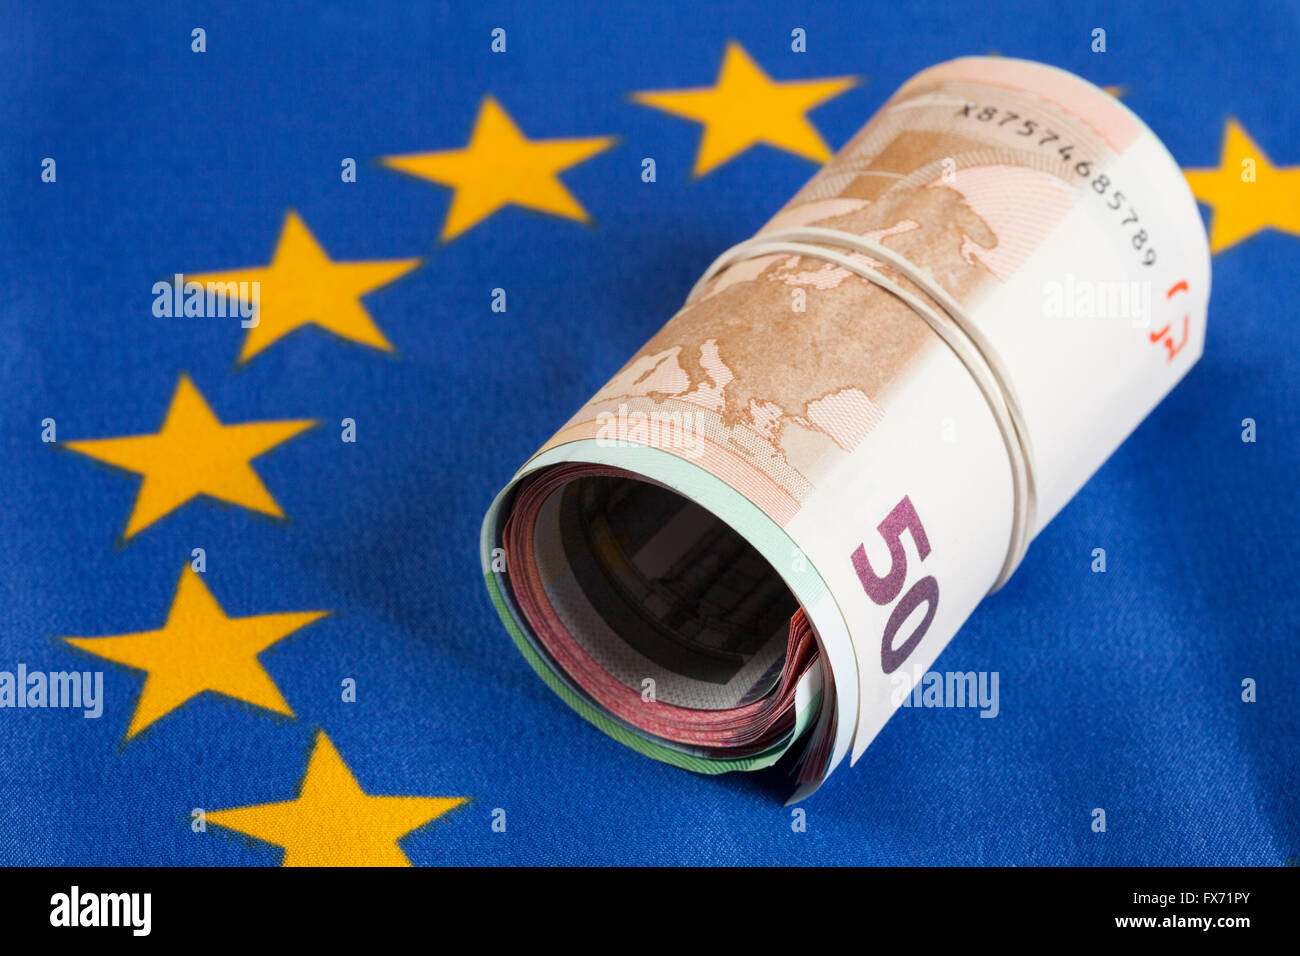 Roll of money with rubber band, multiple bank notes, Euros on European flag Stock Photo